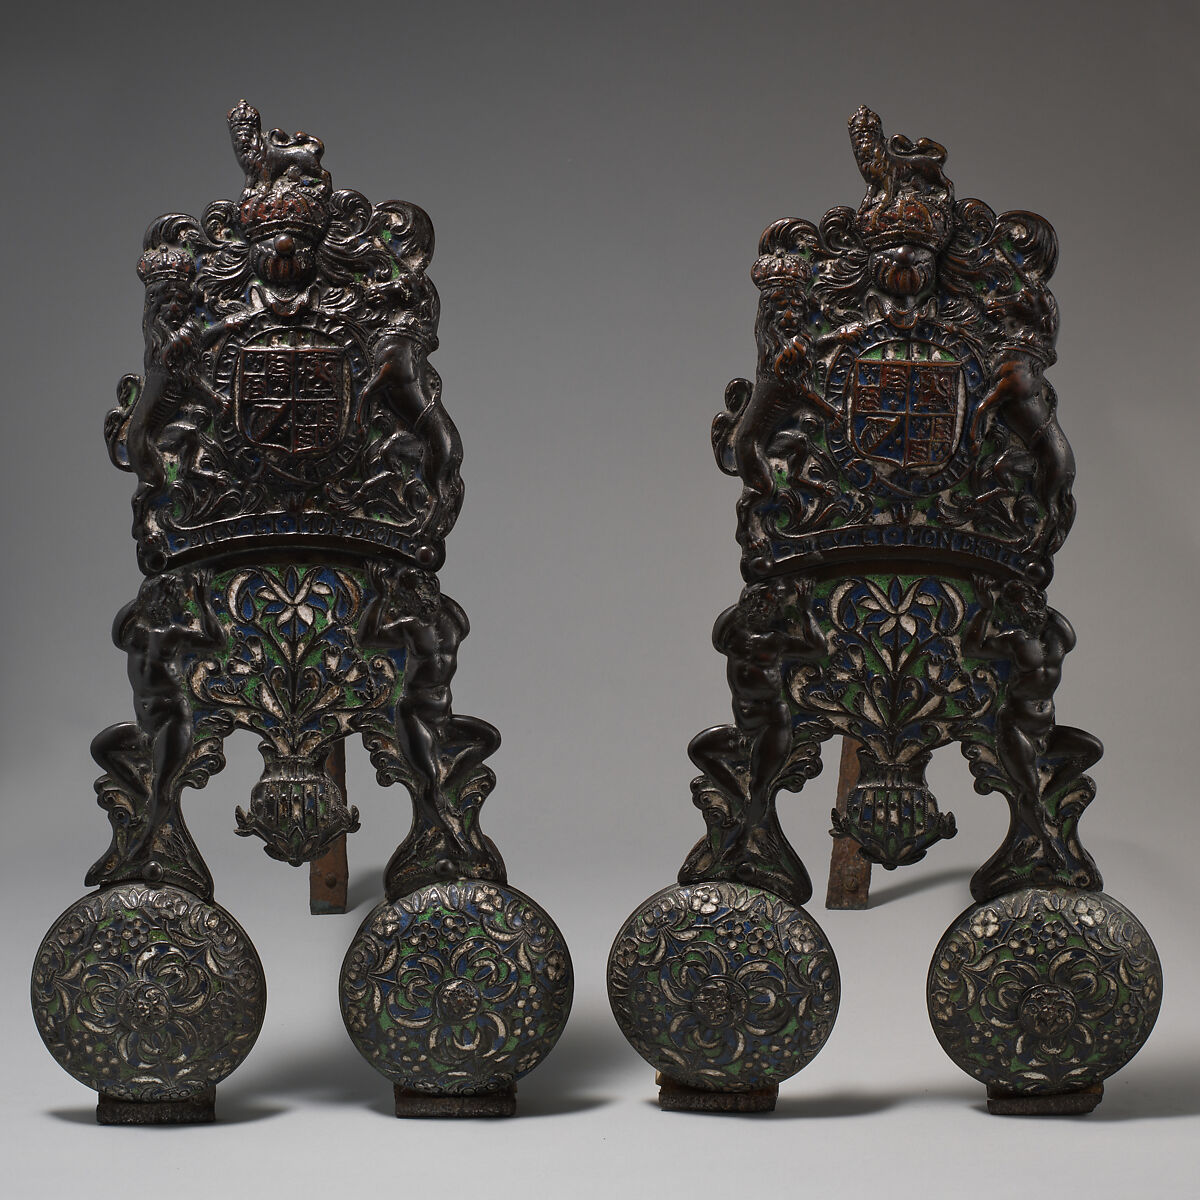 Pair of andirons, Stephen Pilcherd (British, free of the London Founders&#39; Company 1625, died 1670) or, Brass, partly enameled, on a wrought-iron frame, British, London 